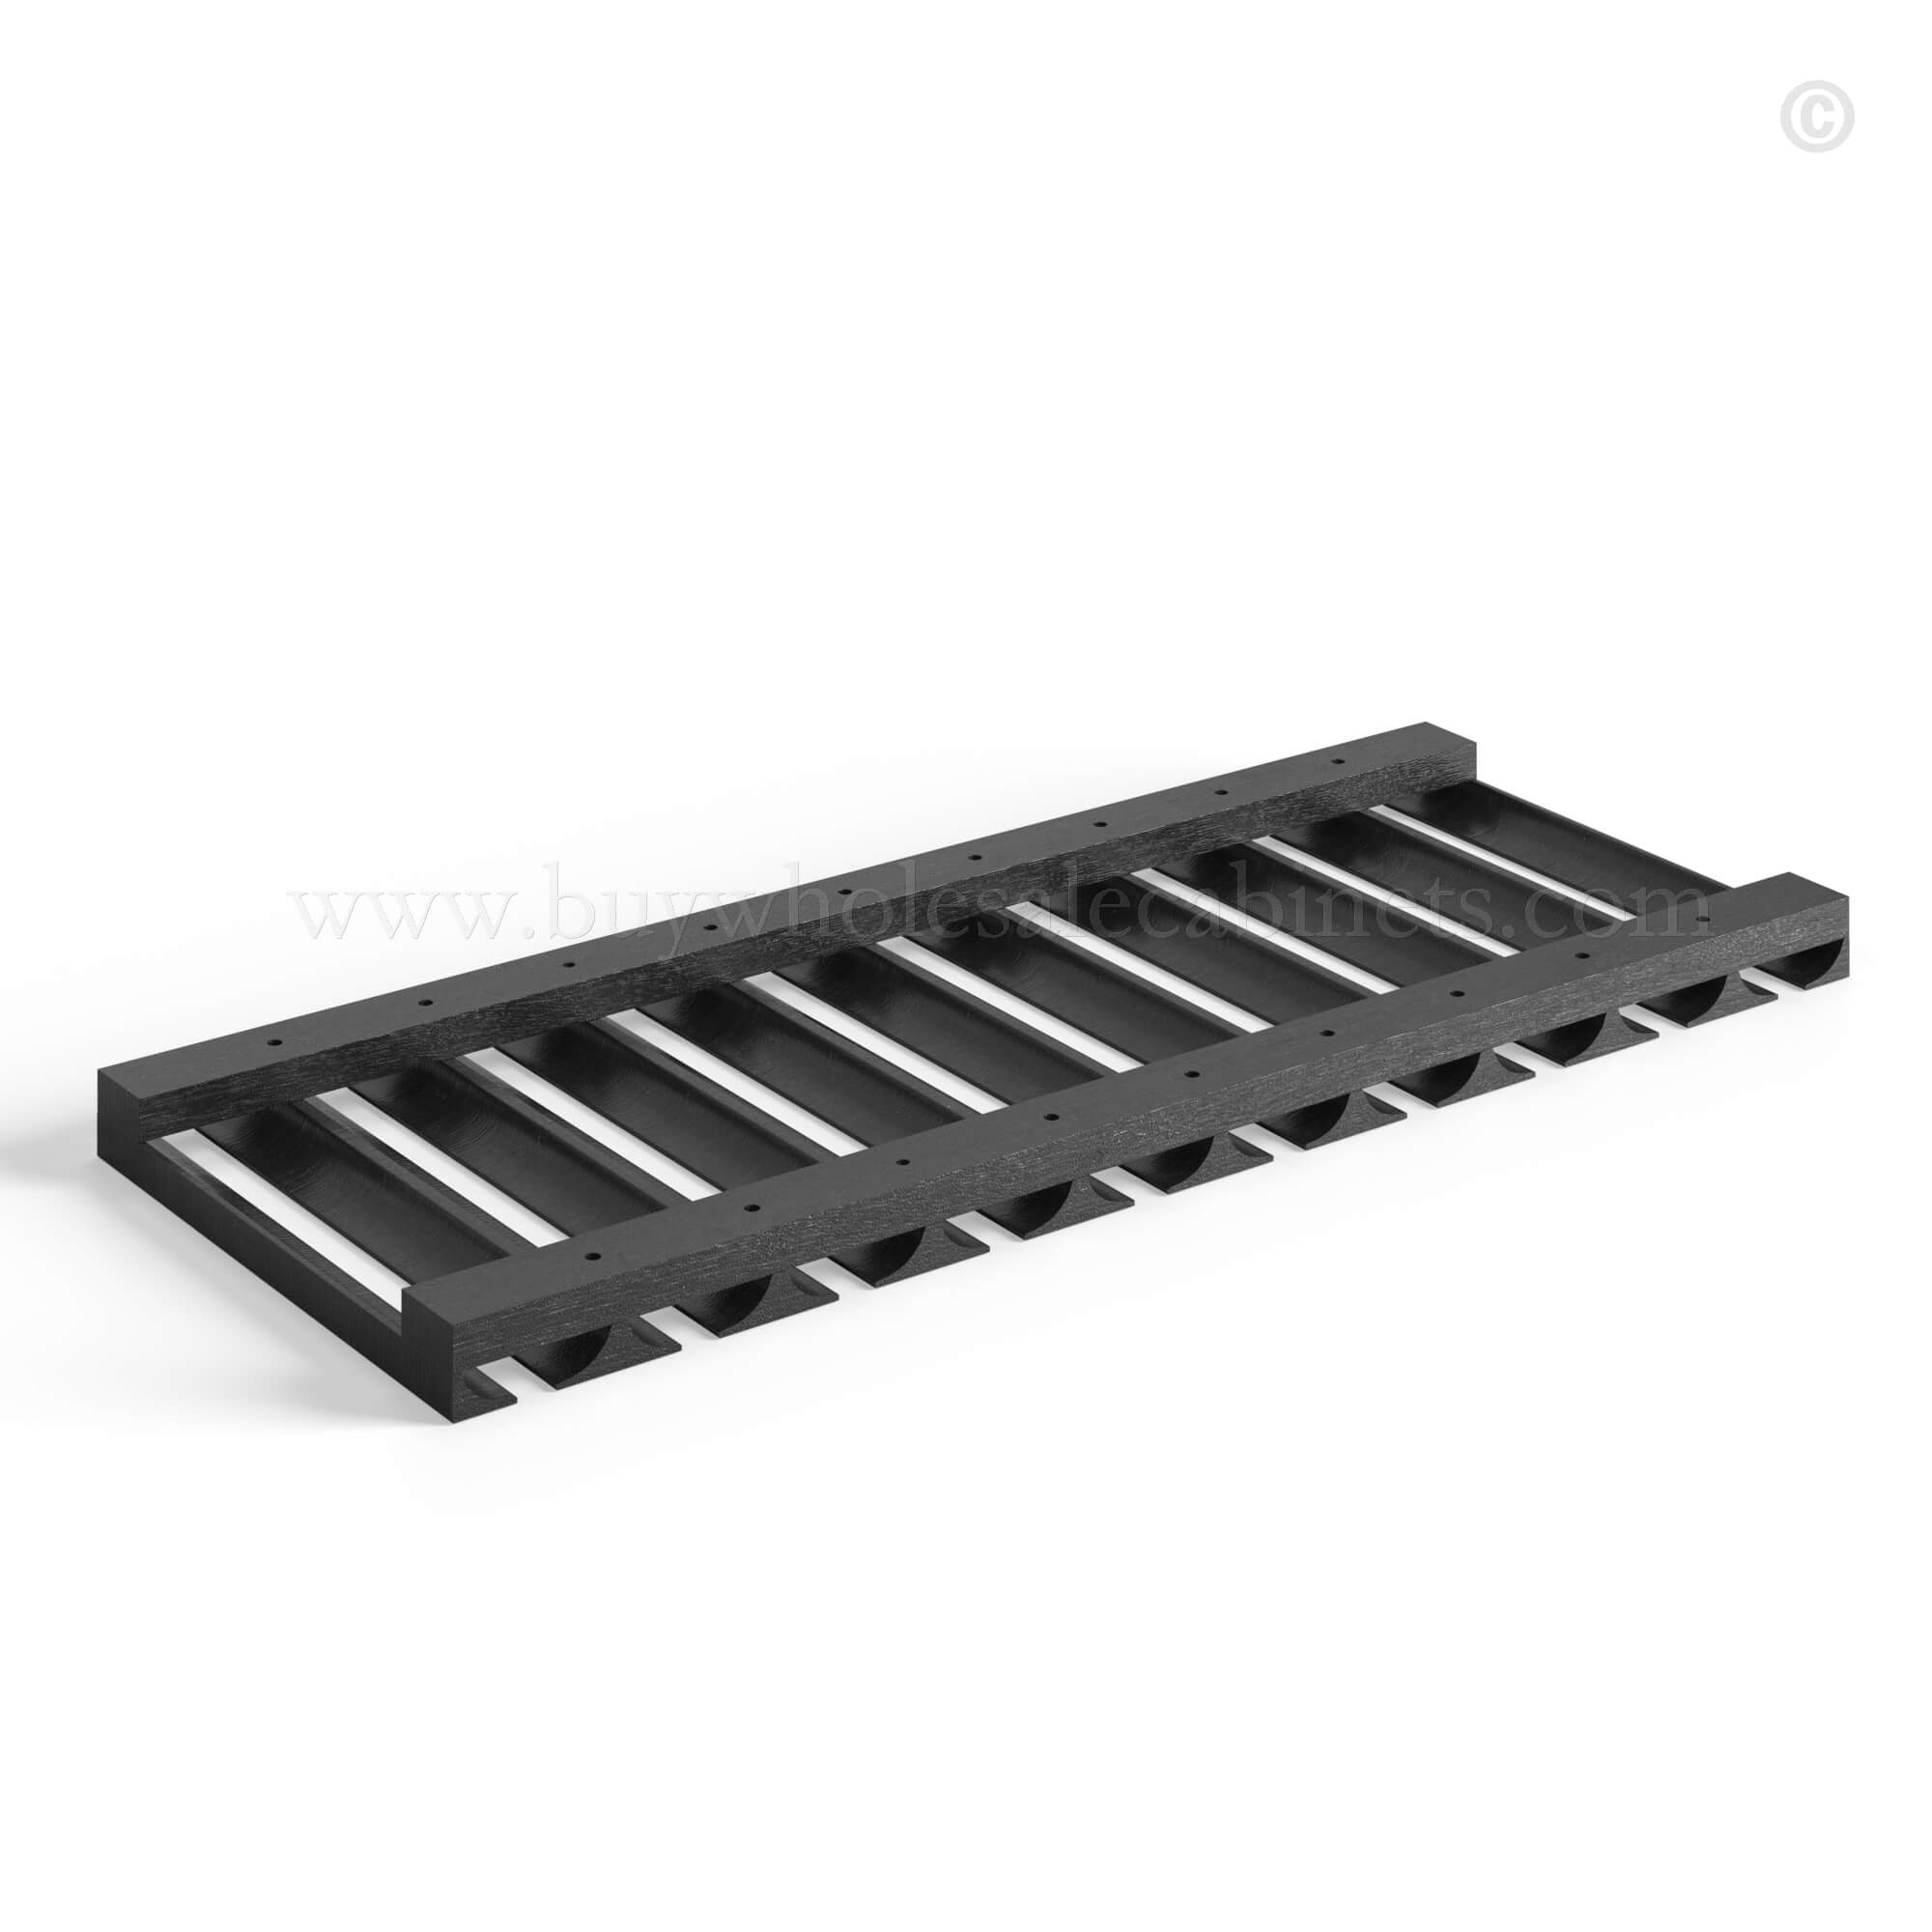 Charcoal Black Shaker Wall Glass Rack Under Cabinet, rta cabinets, wholesale cabinets